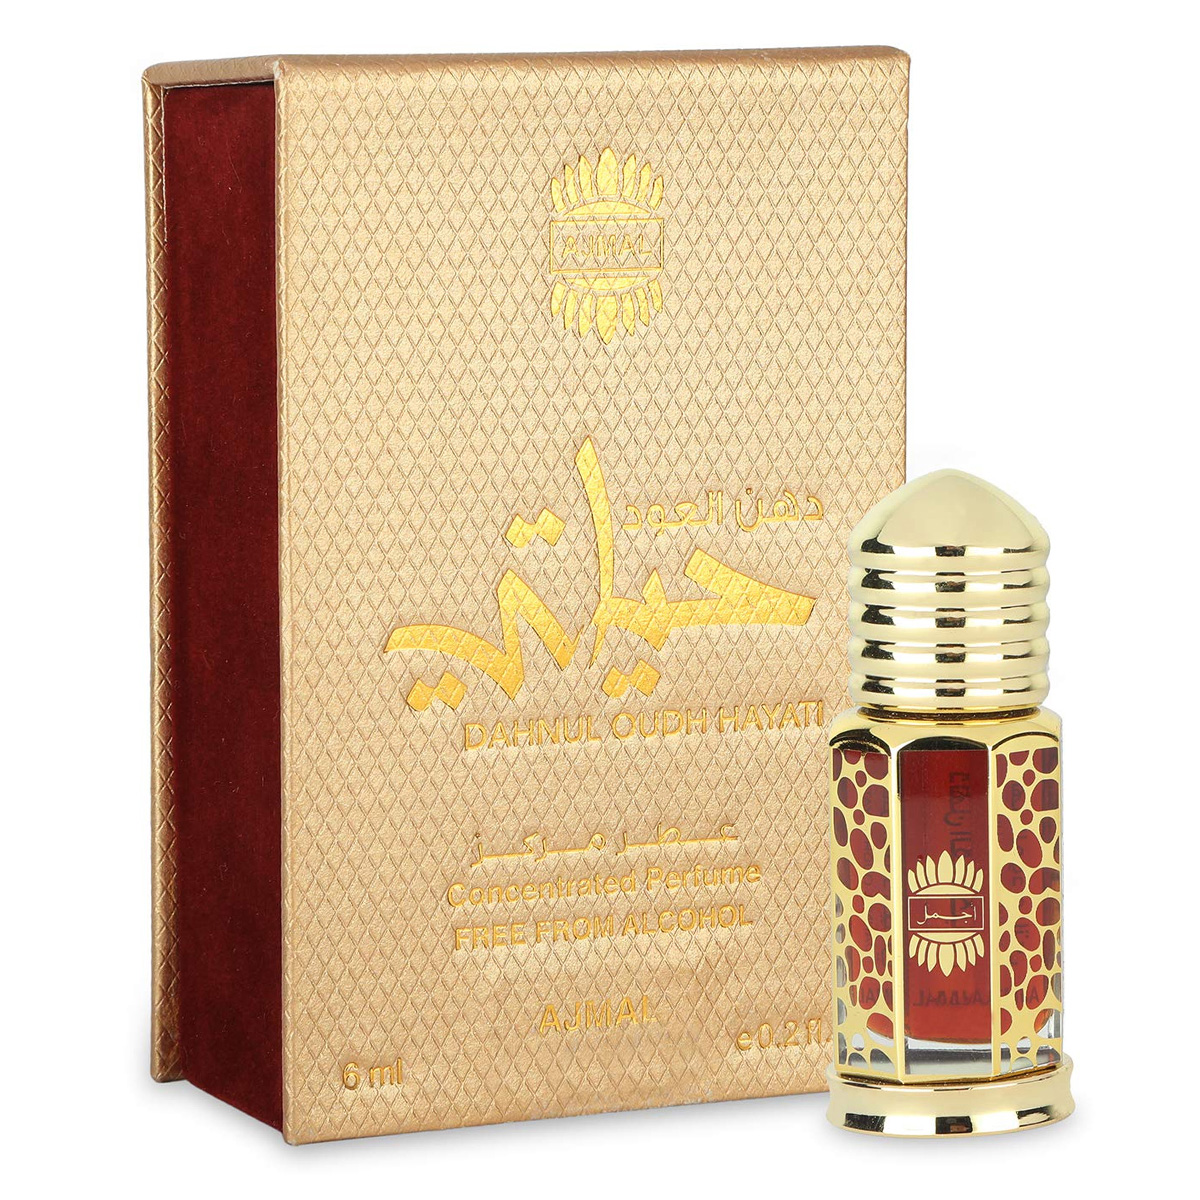 Ajmal Dahnul Oudh Hayati Concentrated Perfume Free From Alcohol, 6ml